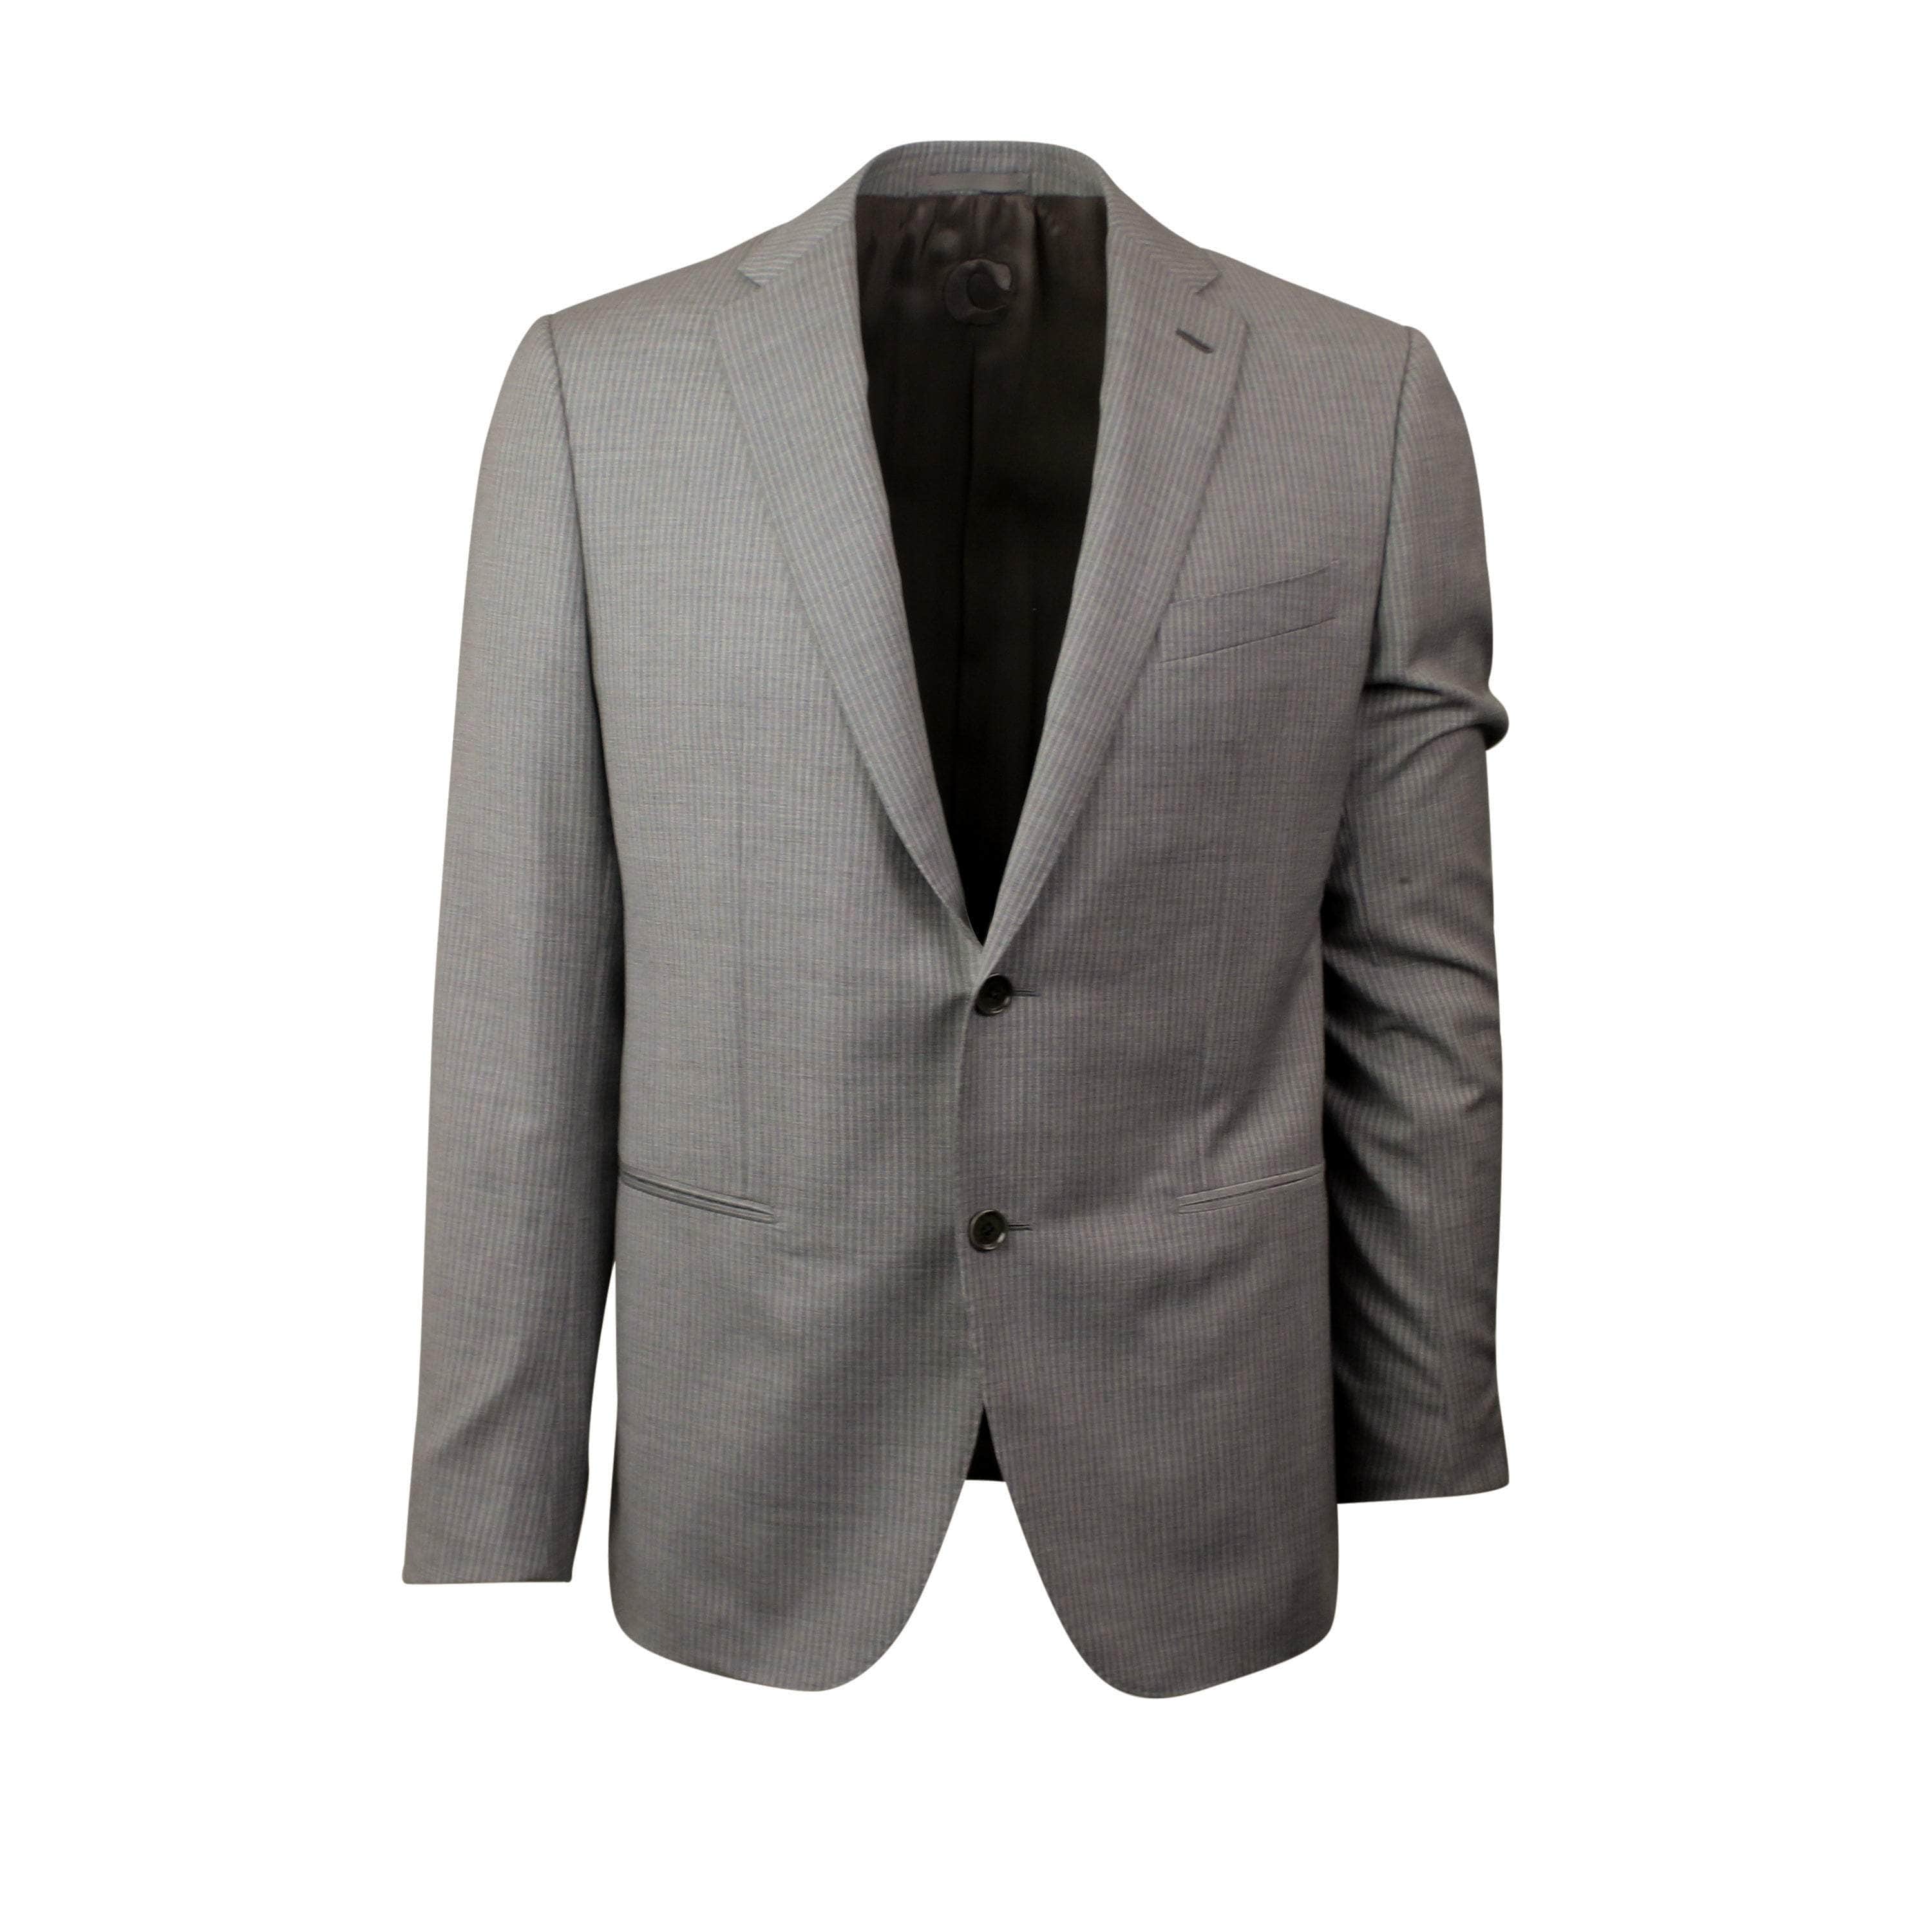 Caruso 500-750, caruso, channelenable-all, chicmi, couponcollection, main-clothing, shop375, size-50, Stadium Goods, stadiumgoods 50 Ash Grey Wool Single Breasted Blazer 9R CRS-XTPS-0131/50 CRS-XTPS-0131/50